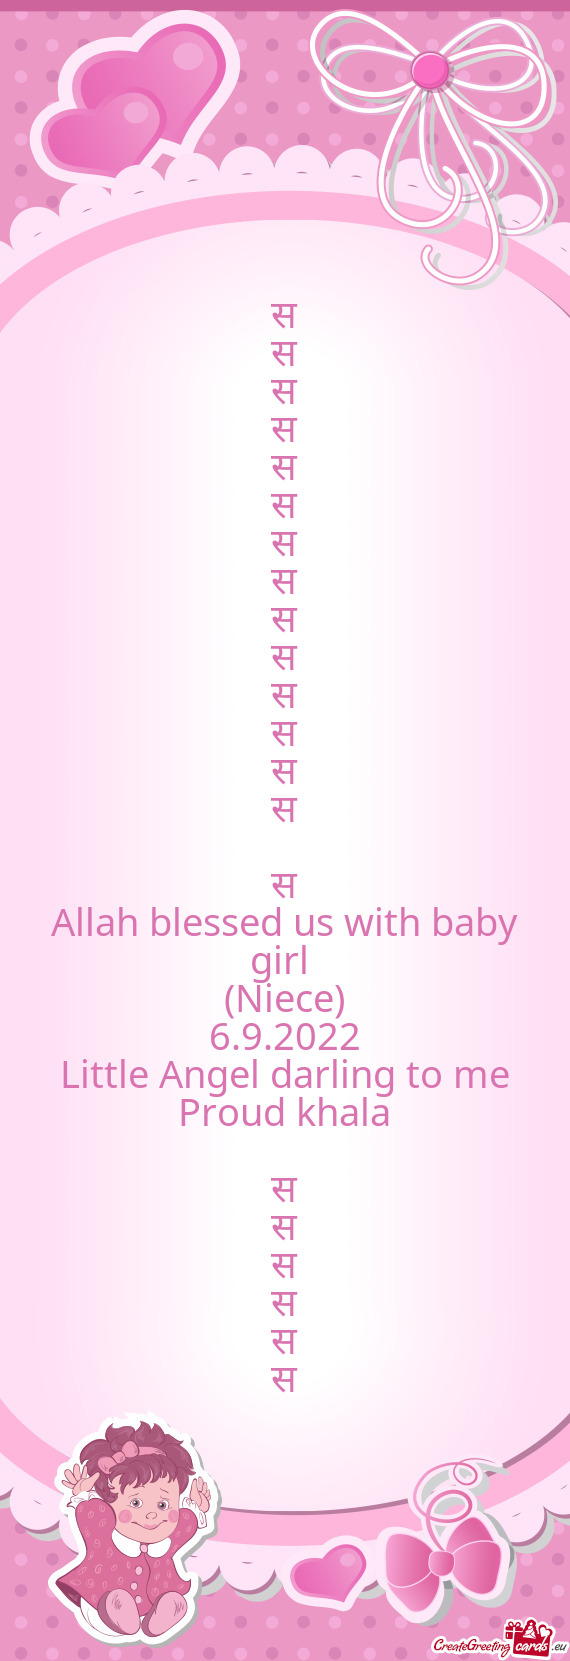 Allah blessed us with baby girl